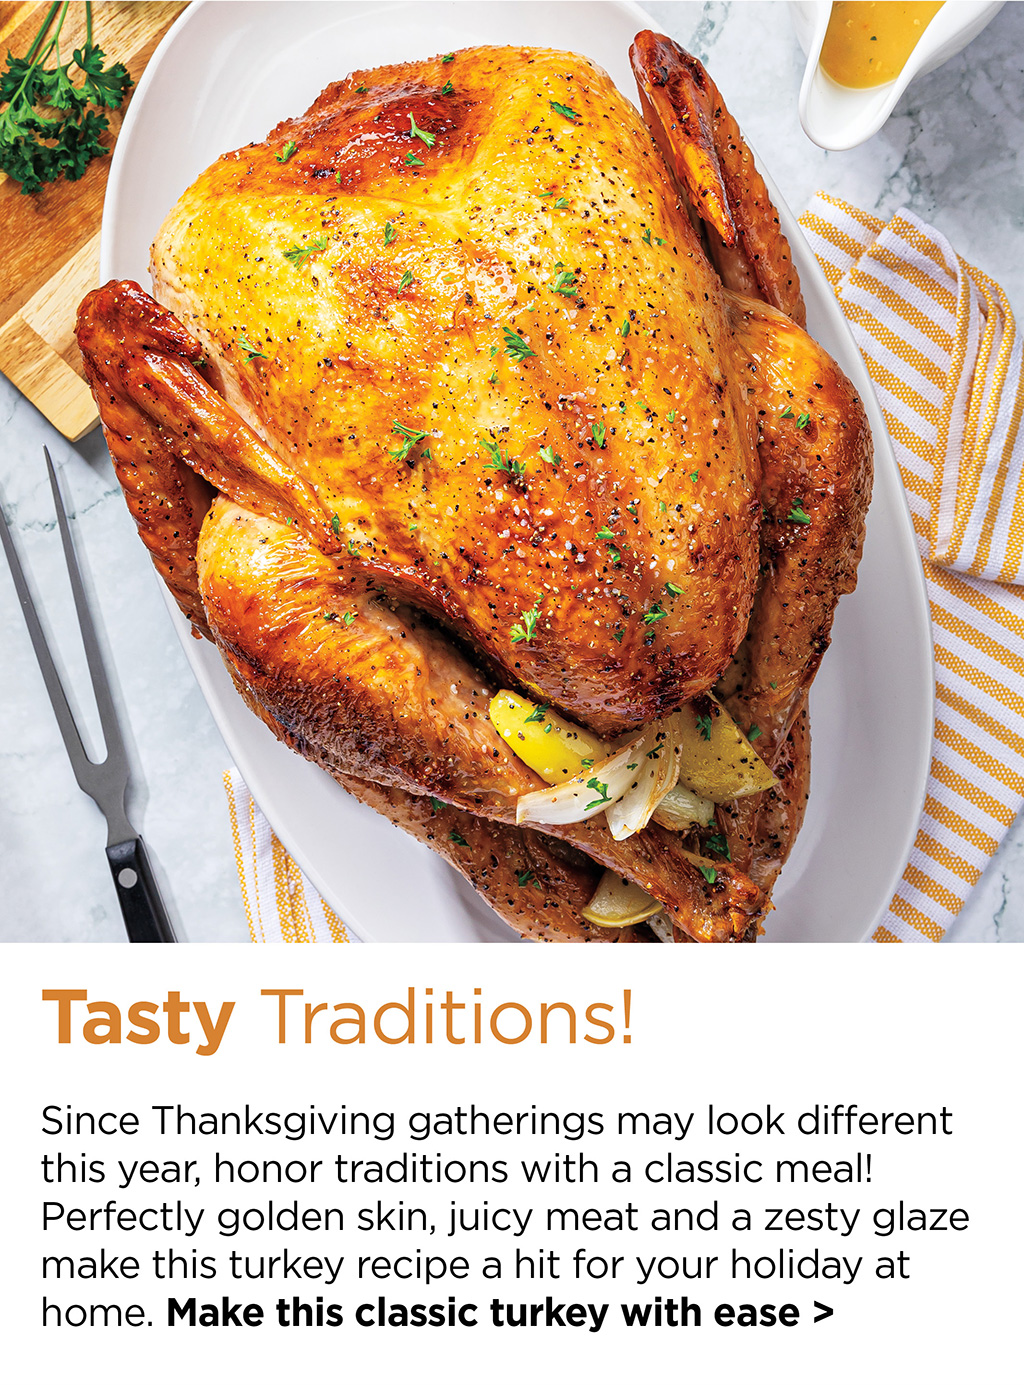 Tasty Traditions! - Since Thanksgiving gatherings may look different this year, honor traditions with a classic meal! Perfectly golden skin, juicy meat and a zesty glaze make this turkey recipe a hit for your holiday at home. Make this classic turkey with ease >